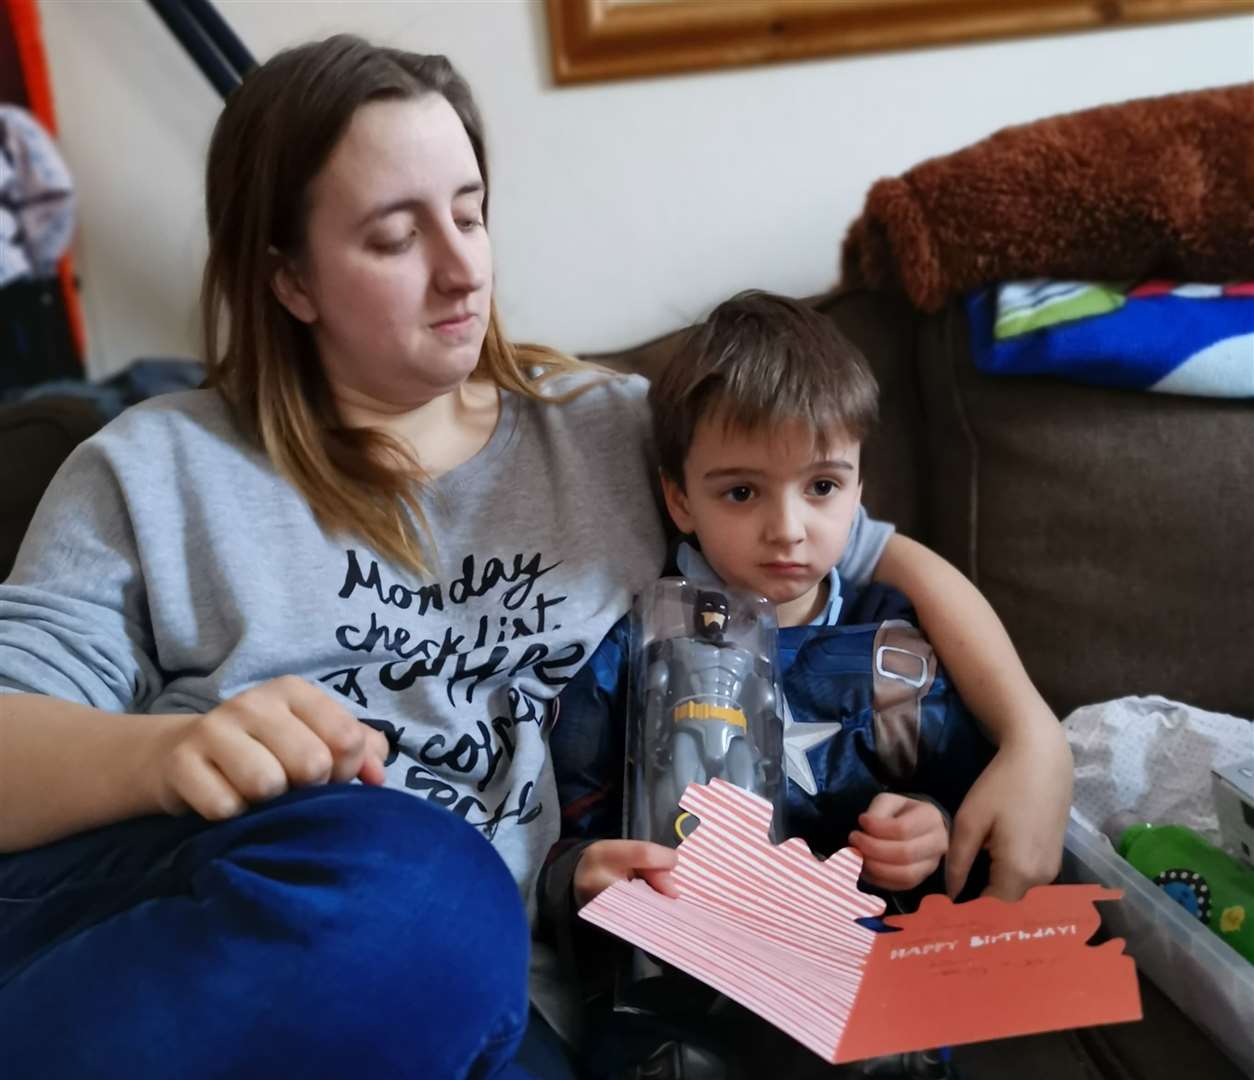 Laura with her son Caleb whose birthday money was stolen